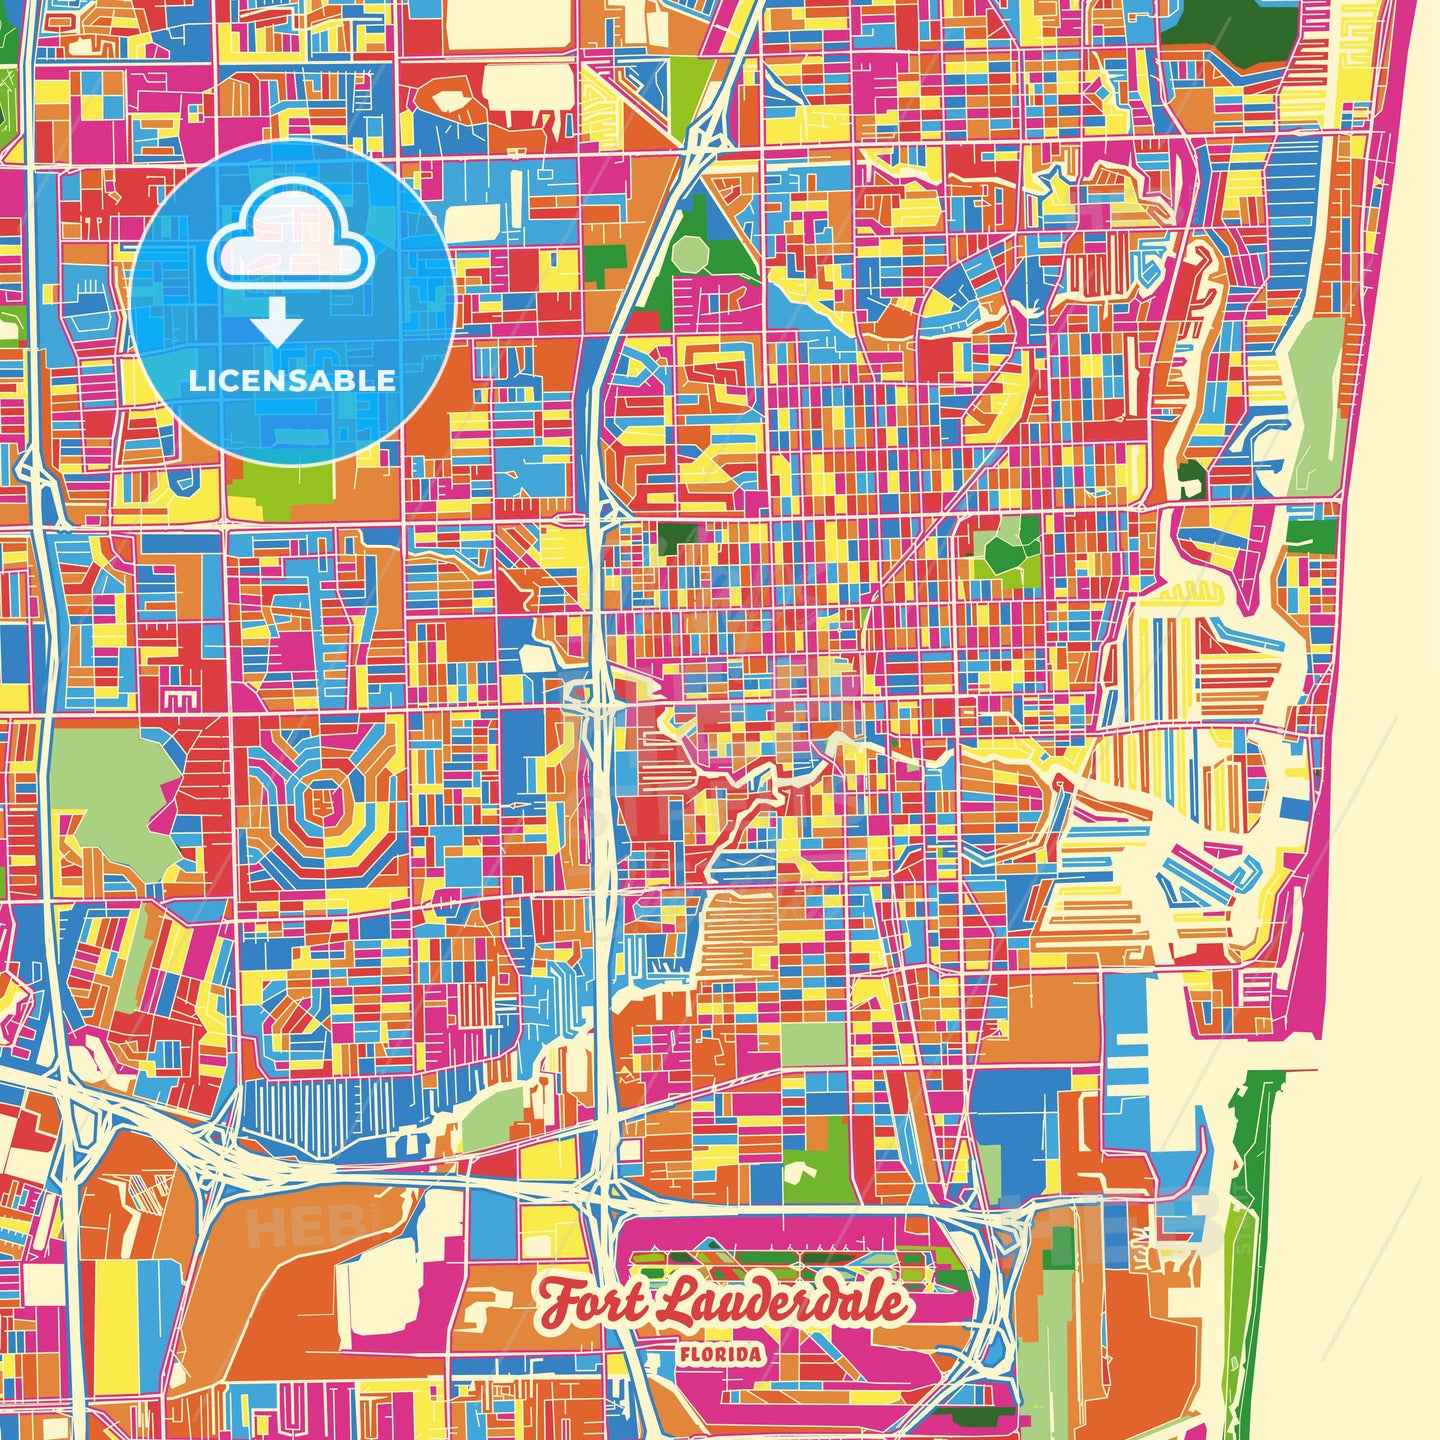 Fort Lauderdale, United States Crazy Colorful Street Map Poster Template - HEBSTREITS Sketches